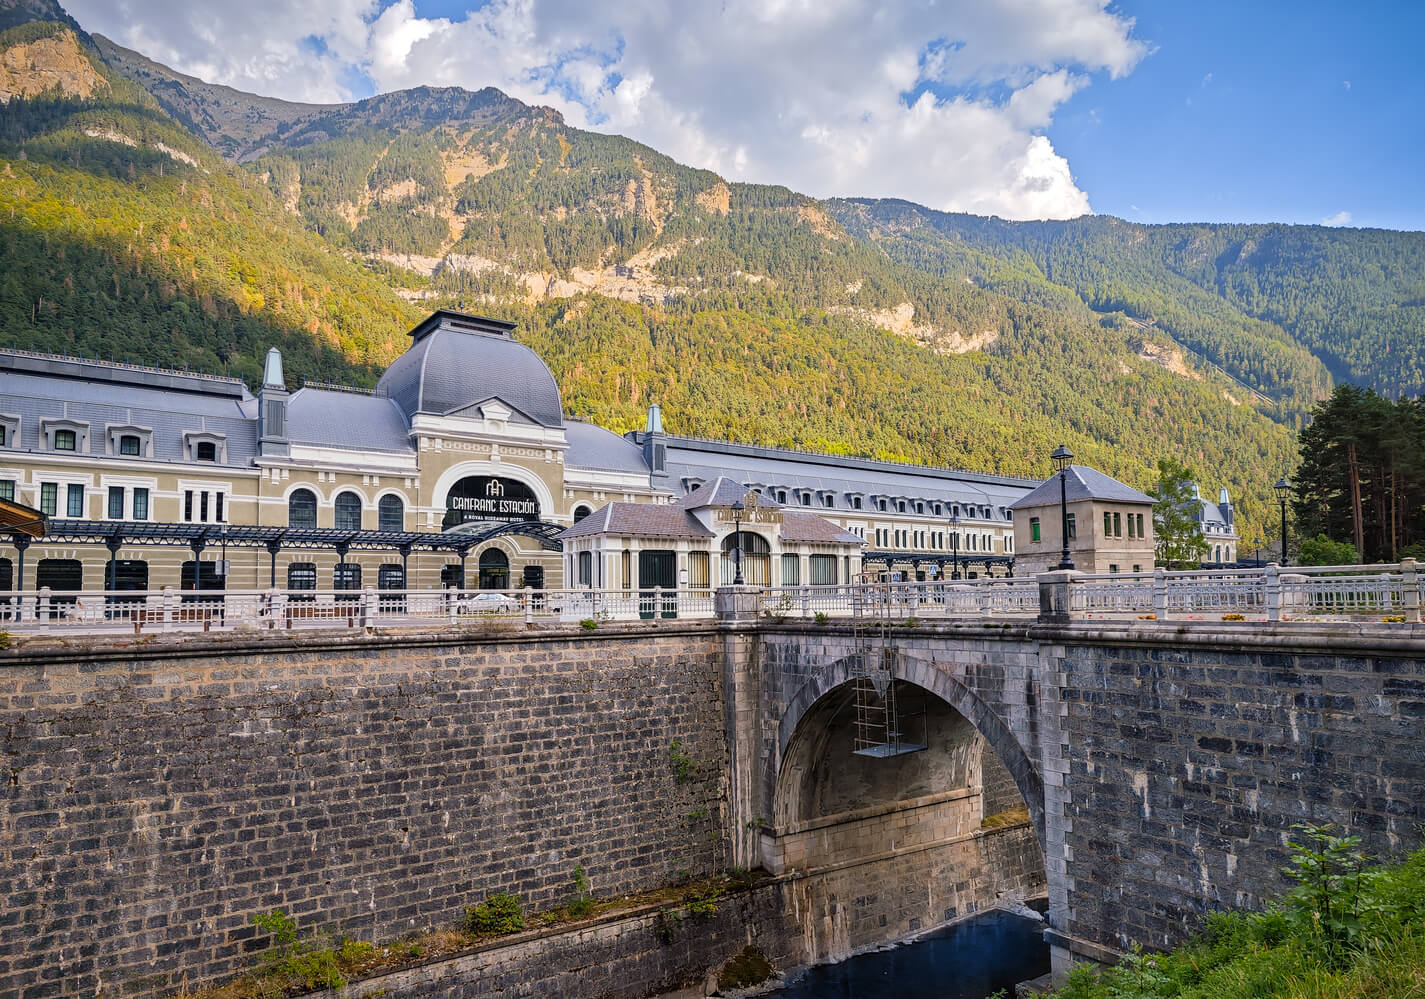 Nice places to visit: Views of Barceló Canfranc Esación from across a bridge